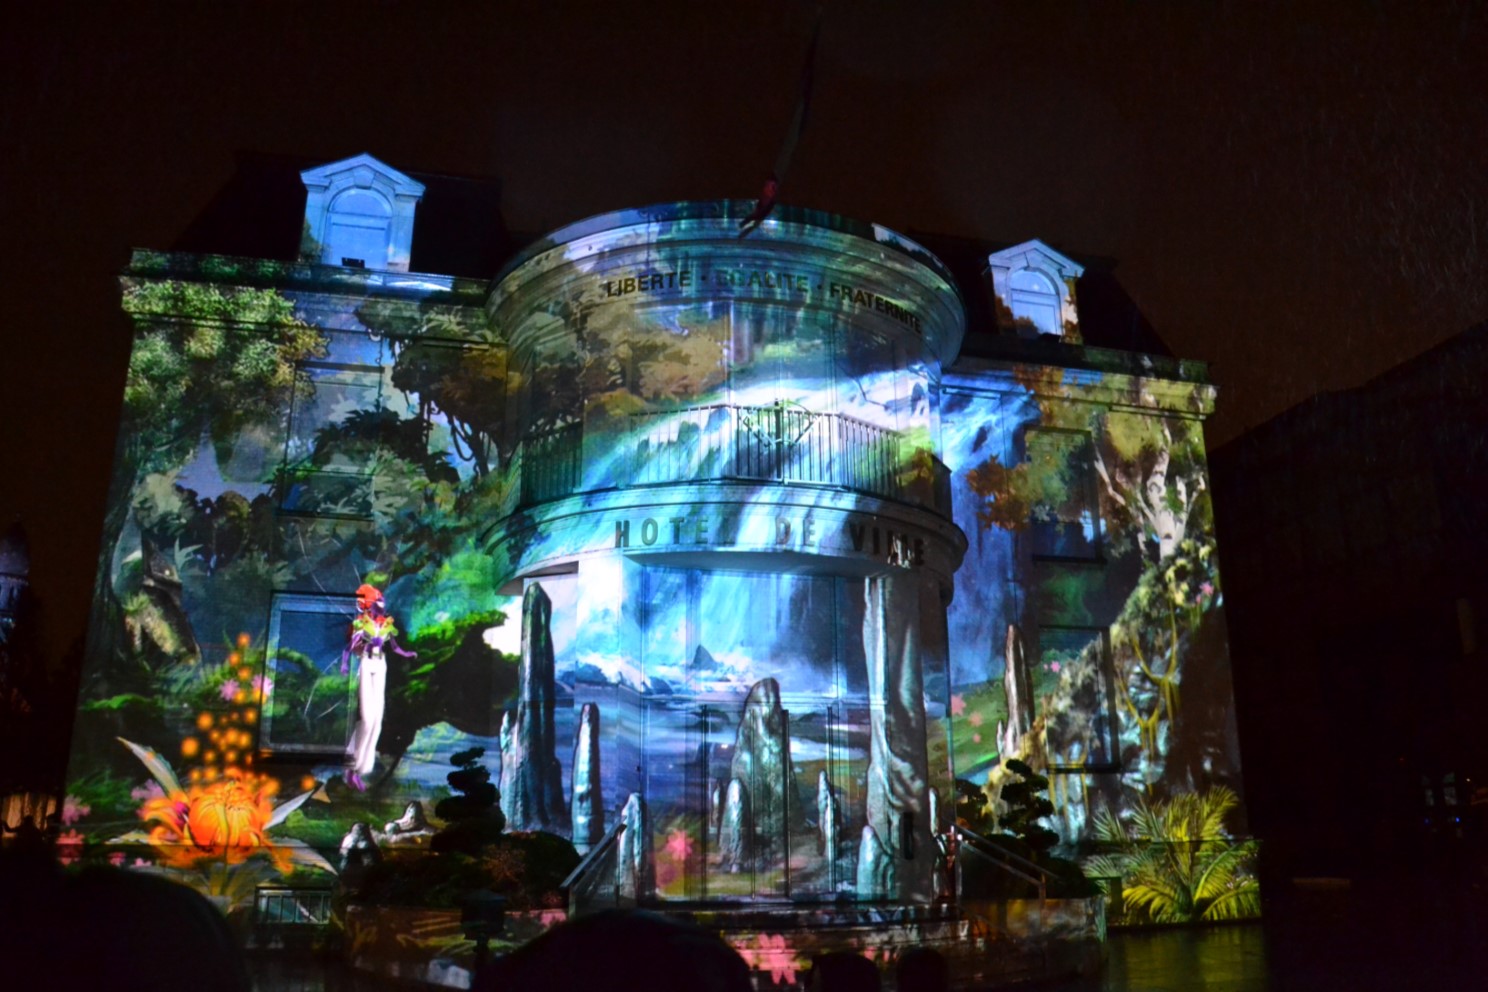 Projections monumentales 2017 - Enghien